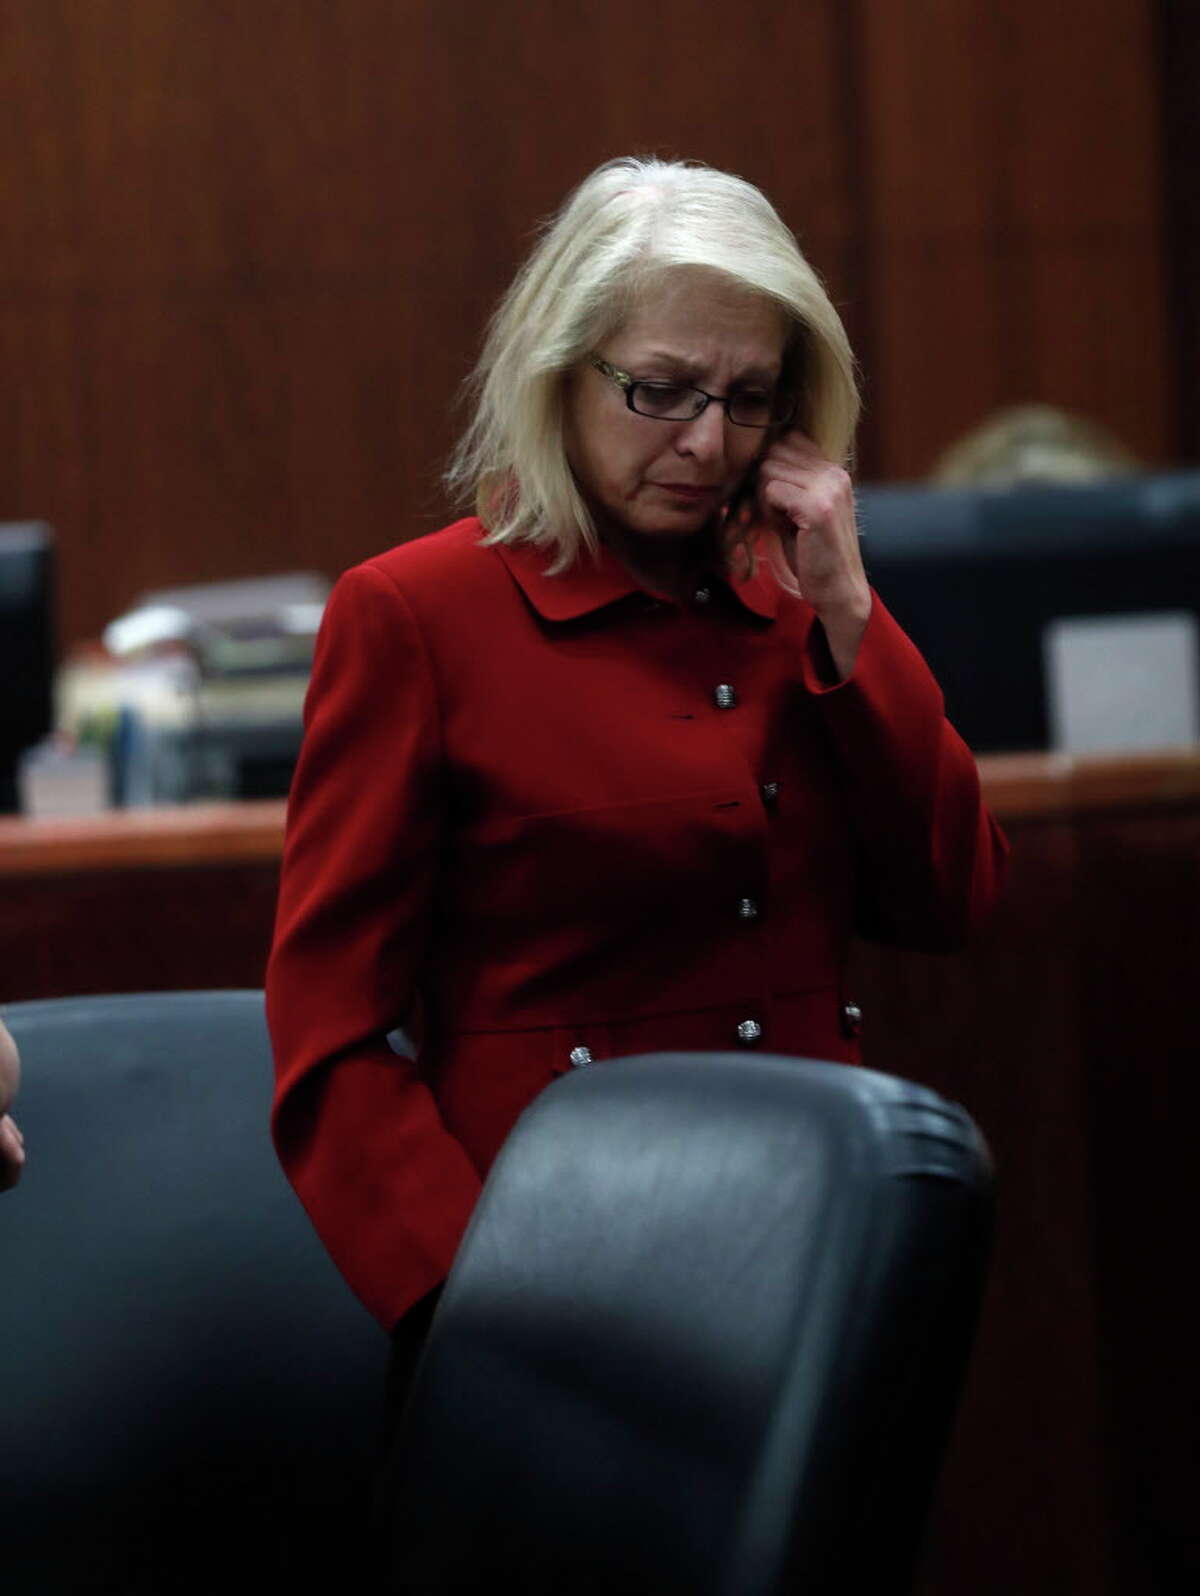 Sandra Melgar reacts after being convicted in the murder of her husband at the Criminal Courthouse, Wednesday, Aug. 23, 2017, in Houston.